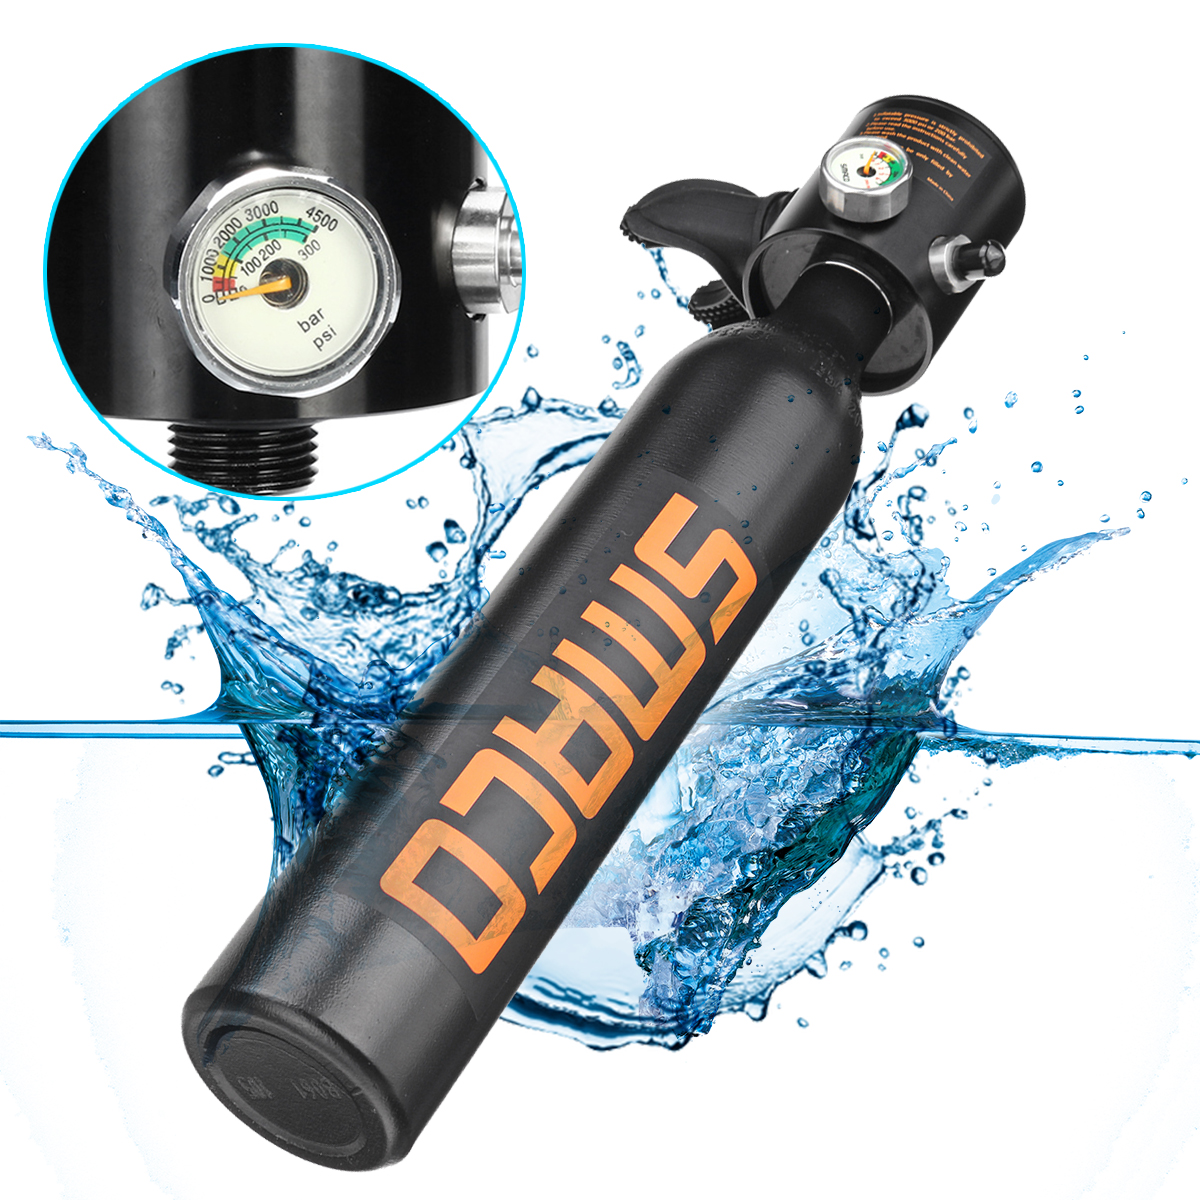 SMACO-4-IN-1-Mini-Scuba-Diving-Cylinder-Oxygen-Air-Tank-Diving-Equipment-w-Hand-Pump-Valve-1534936